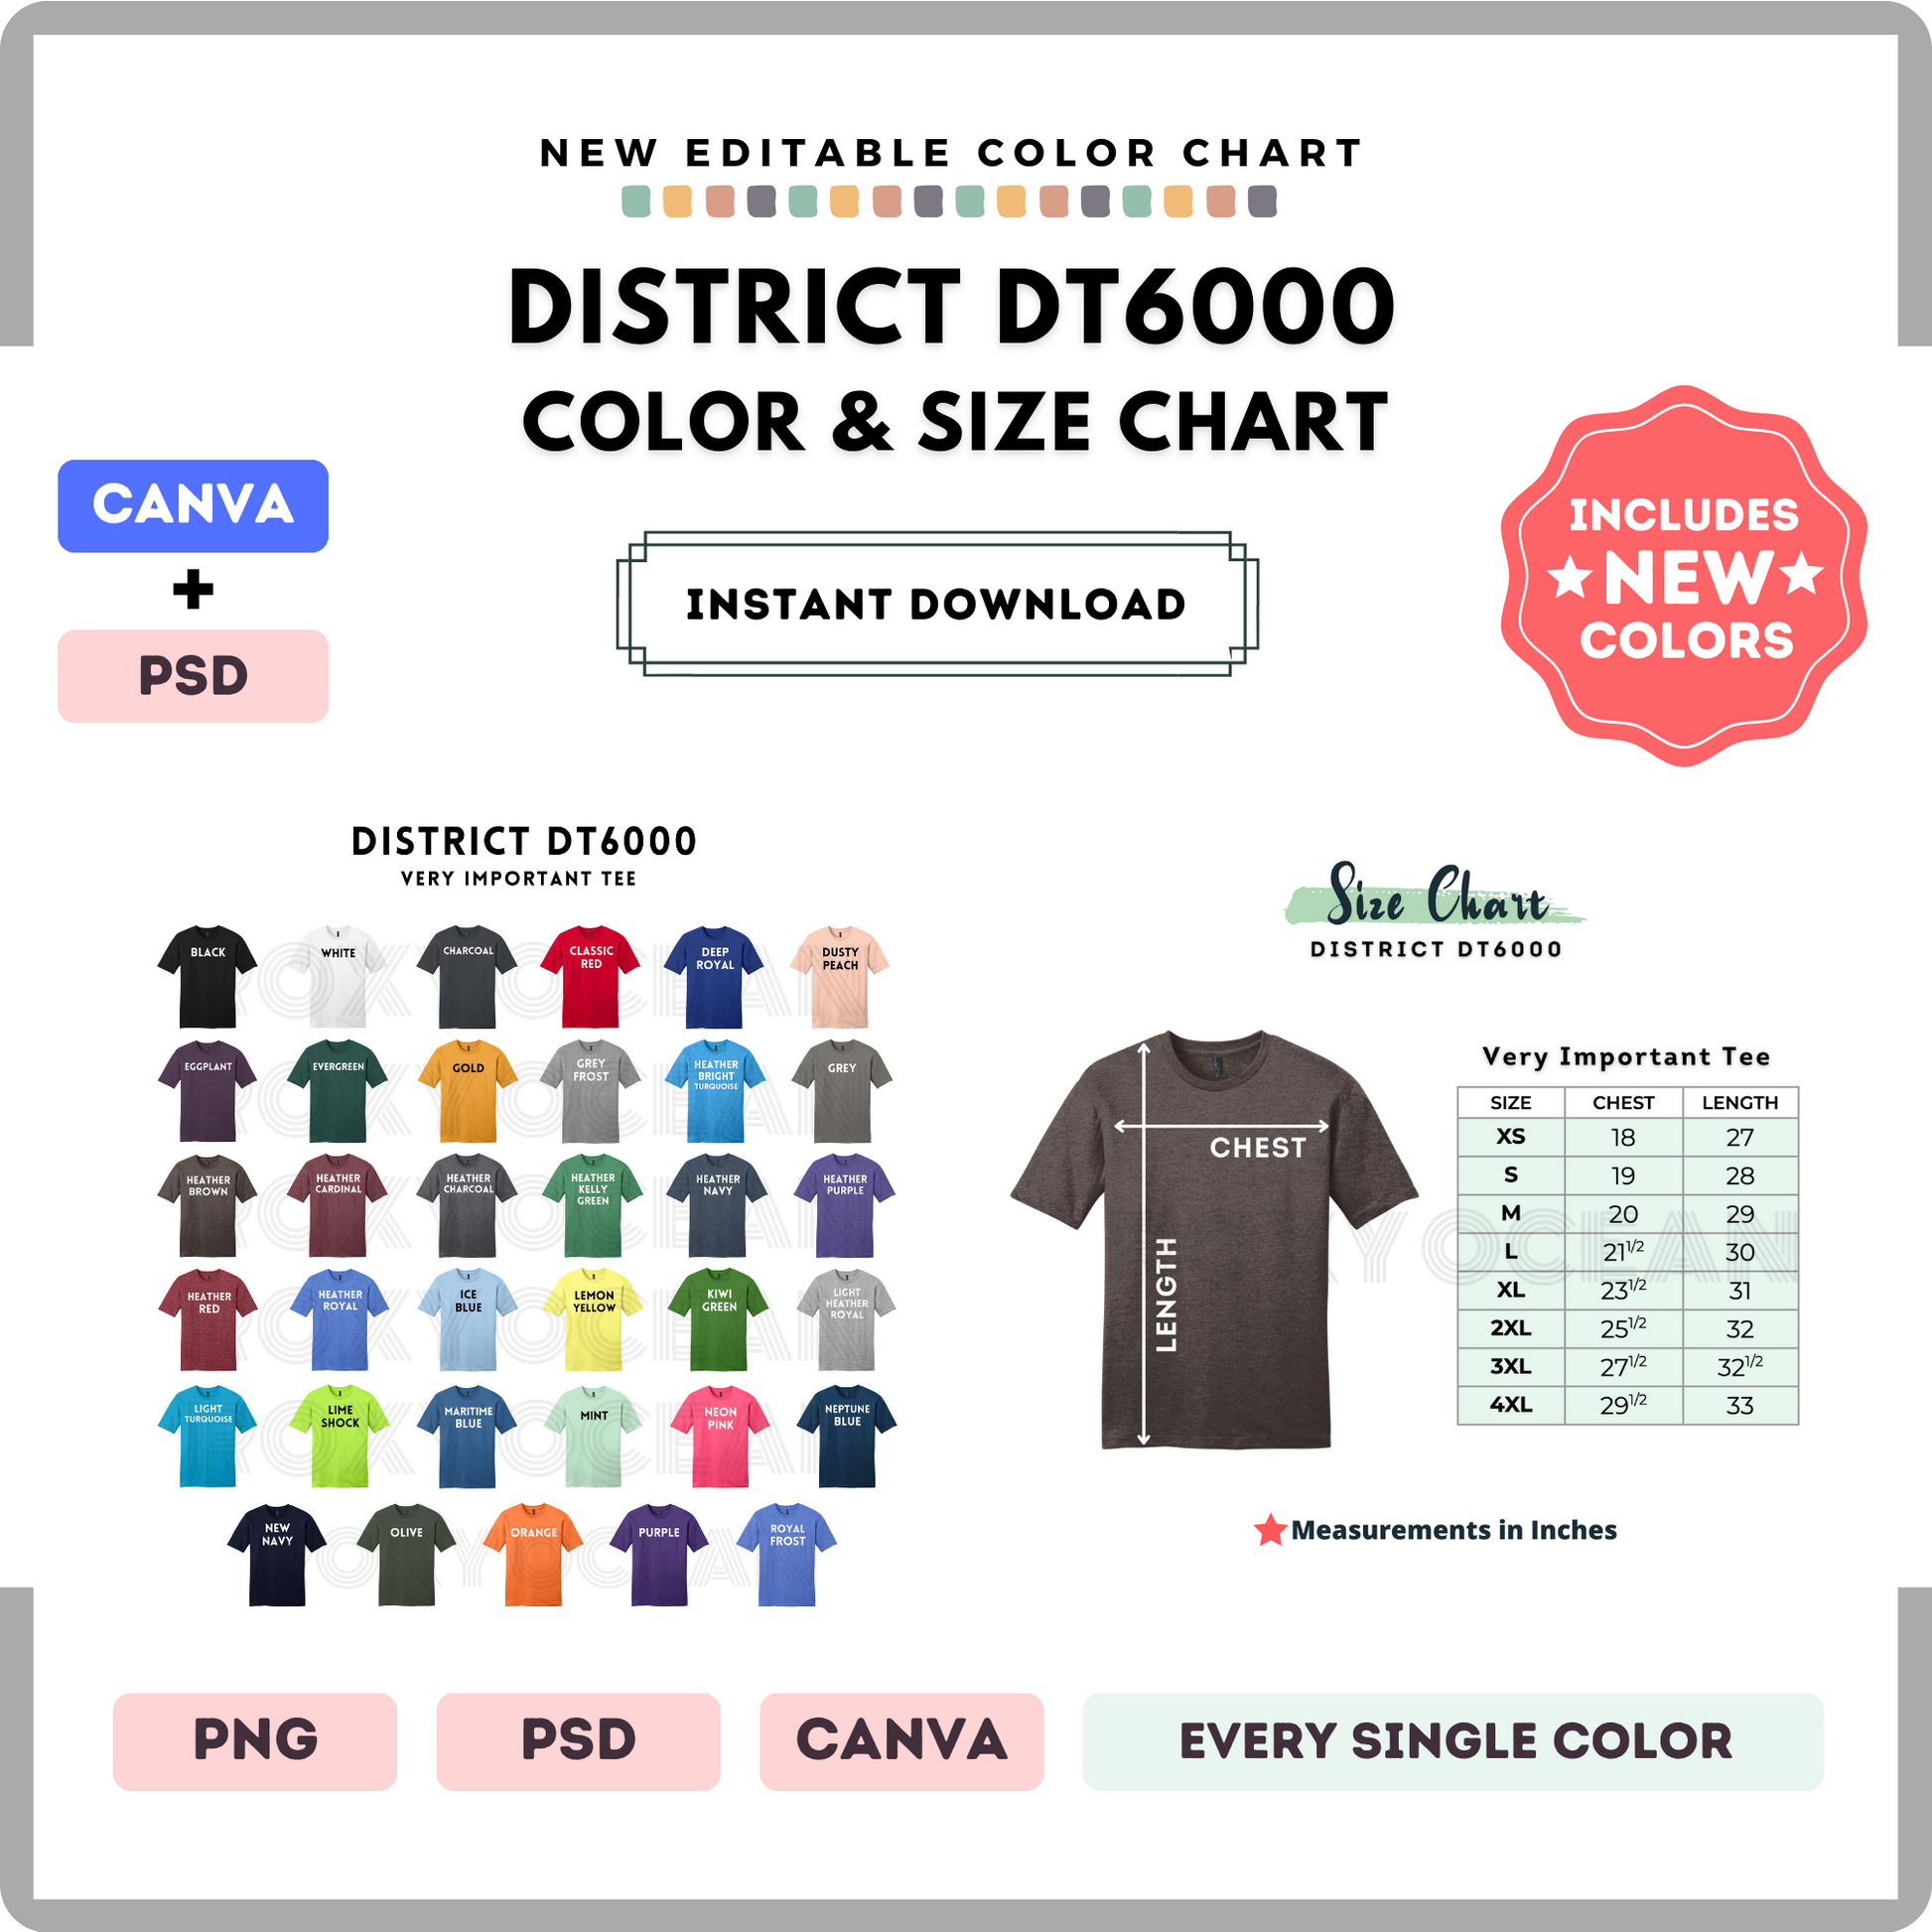 District DT6000 Color and Size Chart